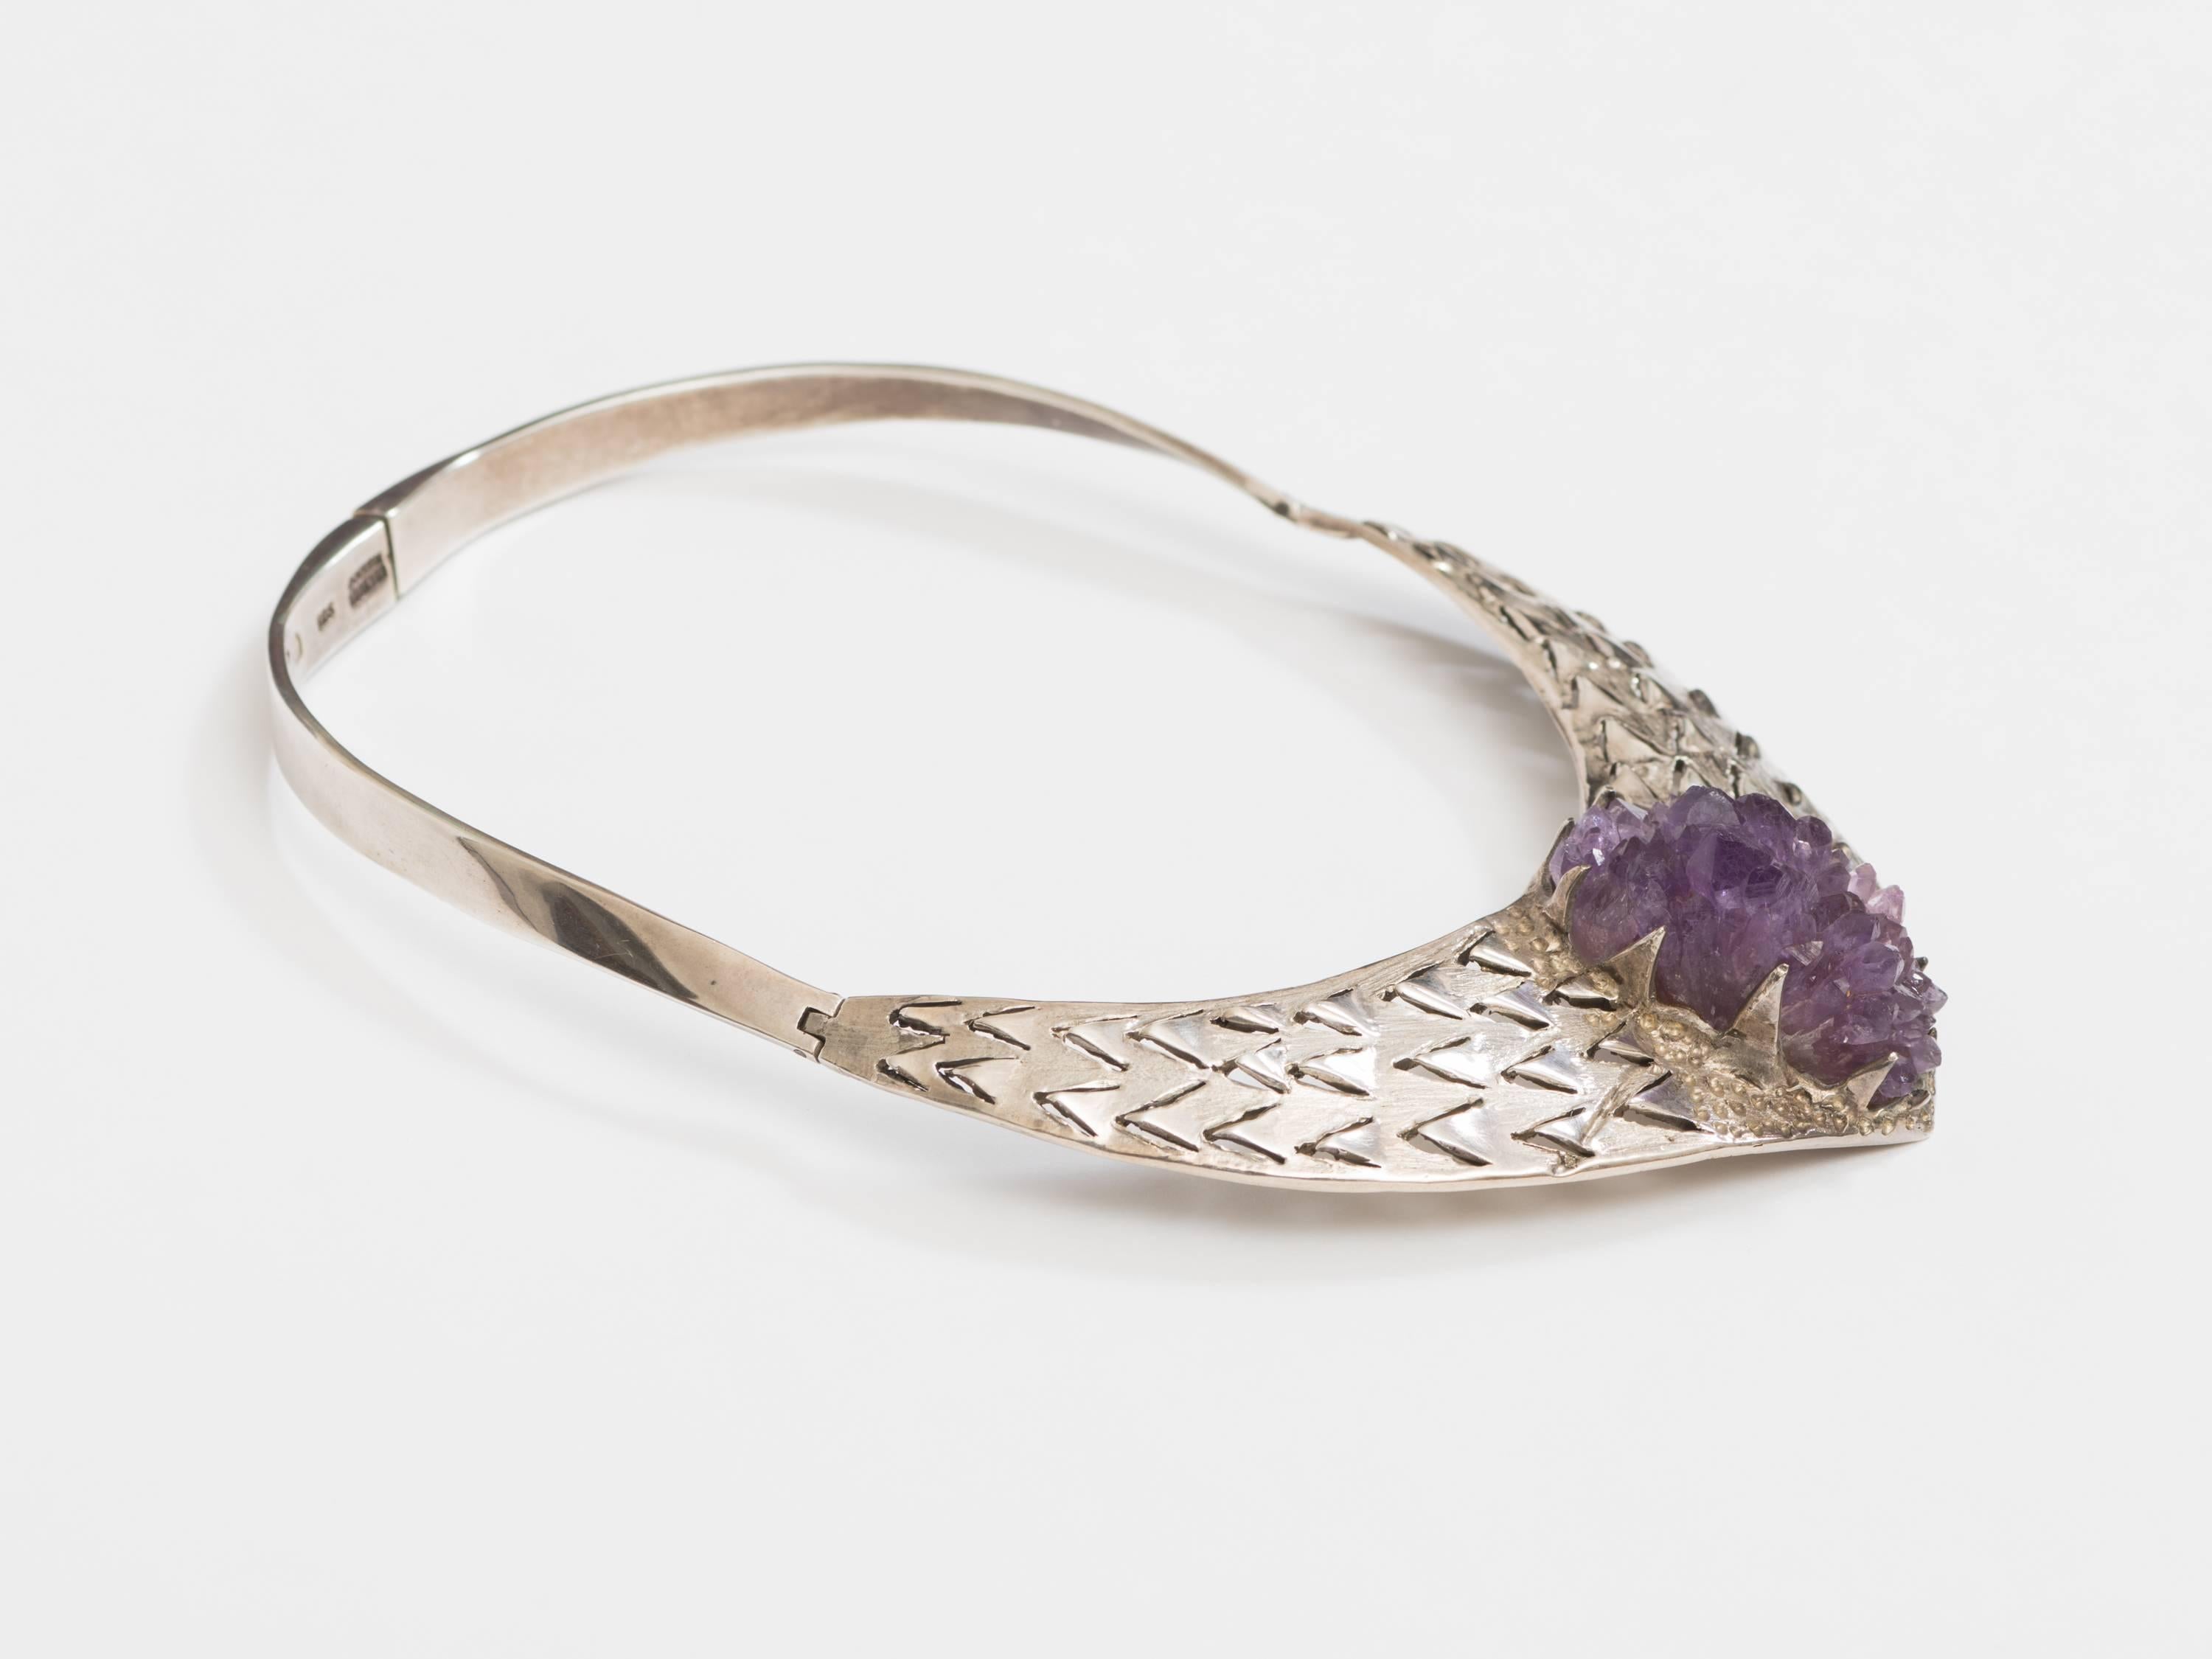 Hand-Crafted Brutalist 1970s Mexican Silver and Amethyst Necklace by Josefina Zagal